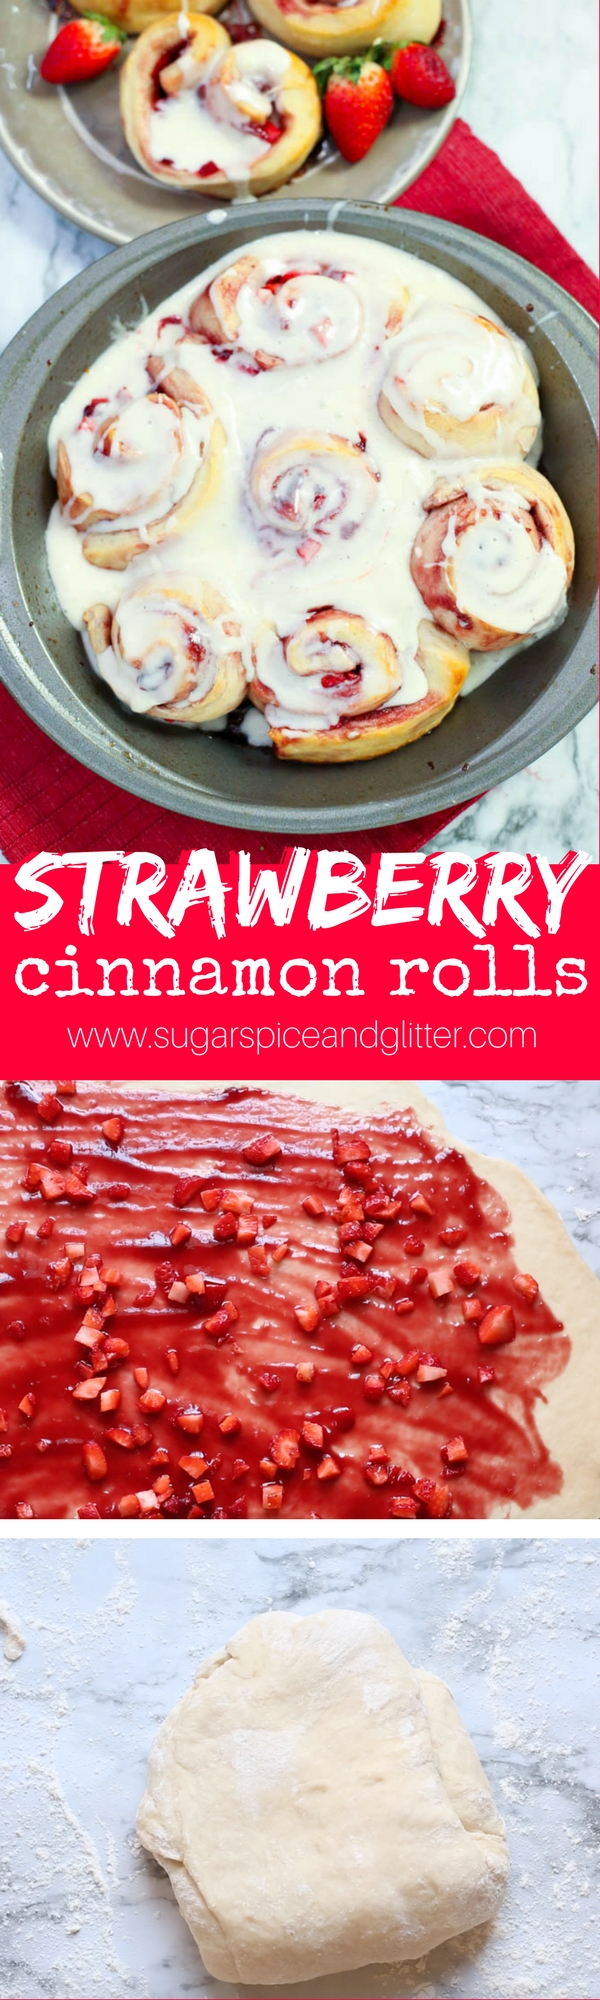 Easy sweet rolls recipe, this strawberry sweet roll recipe is a fun twist on traditional cinnamon buns, made with fresh strawberries. Swap them out for blueberries or your favorite in-season fruit